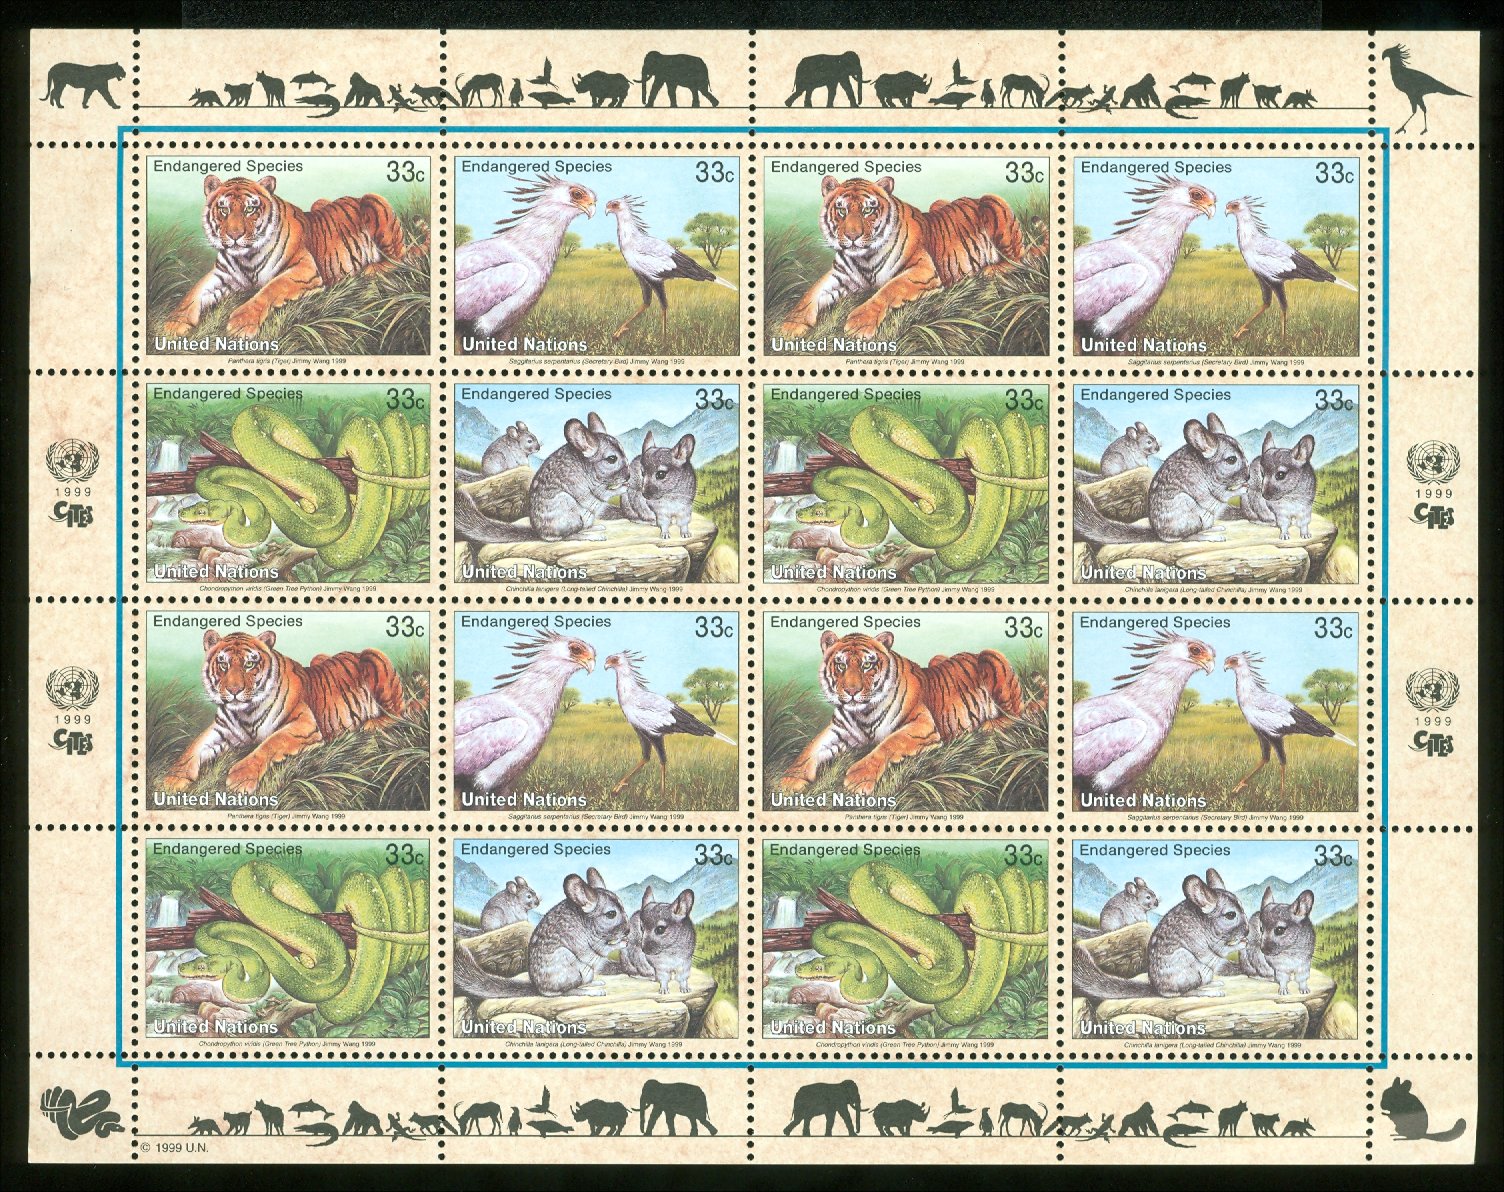 UNNY 757-60  33c Endangered Species, sheet of 16* #ny757-60sh